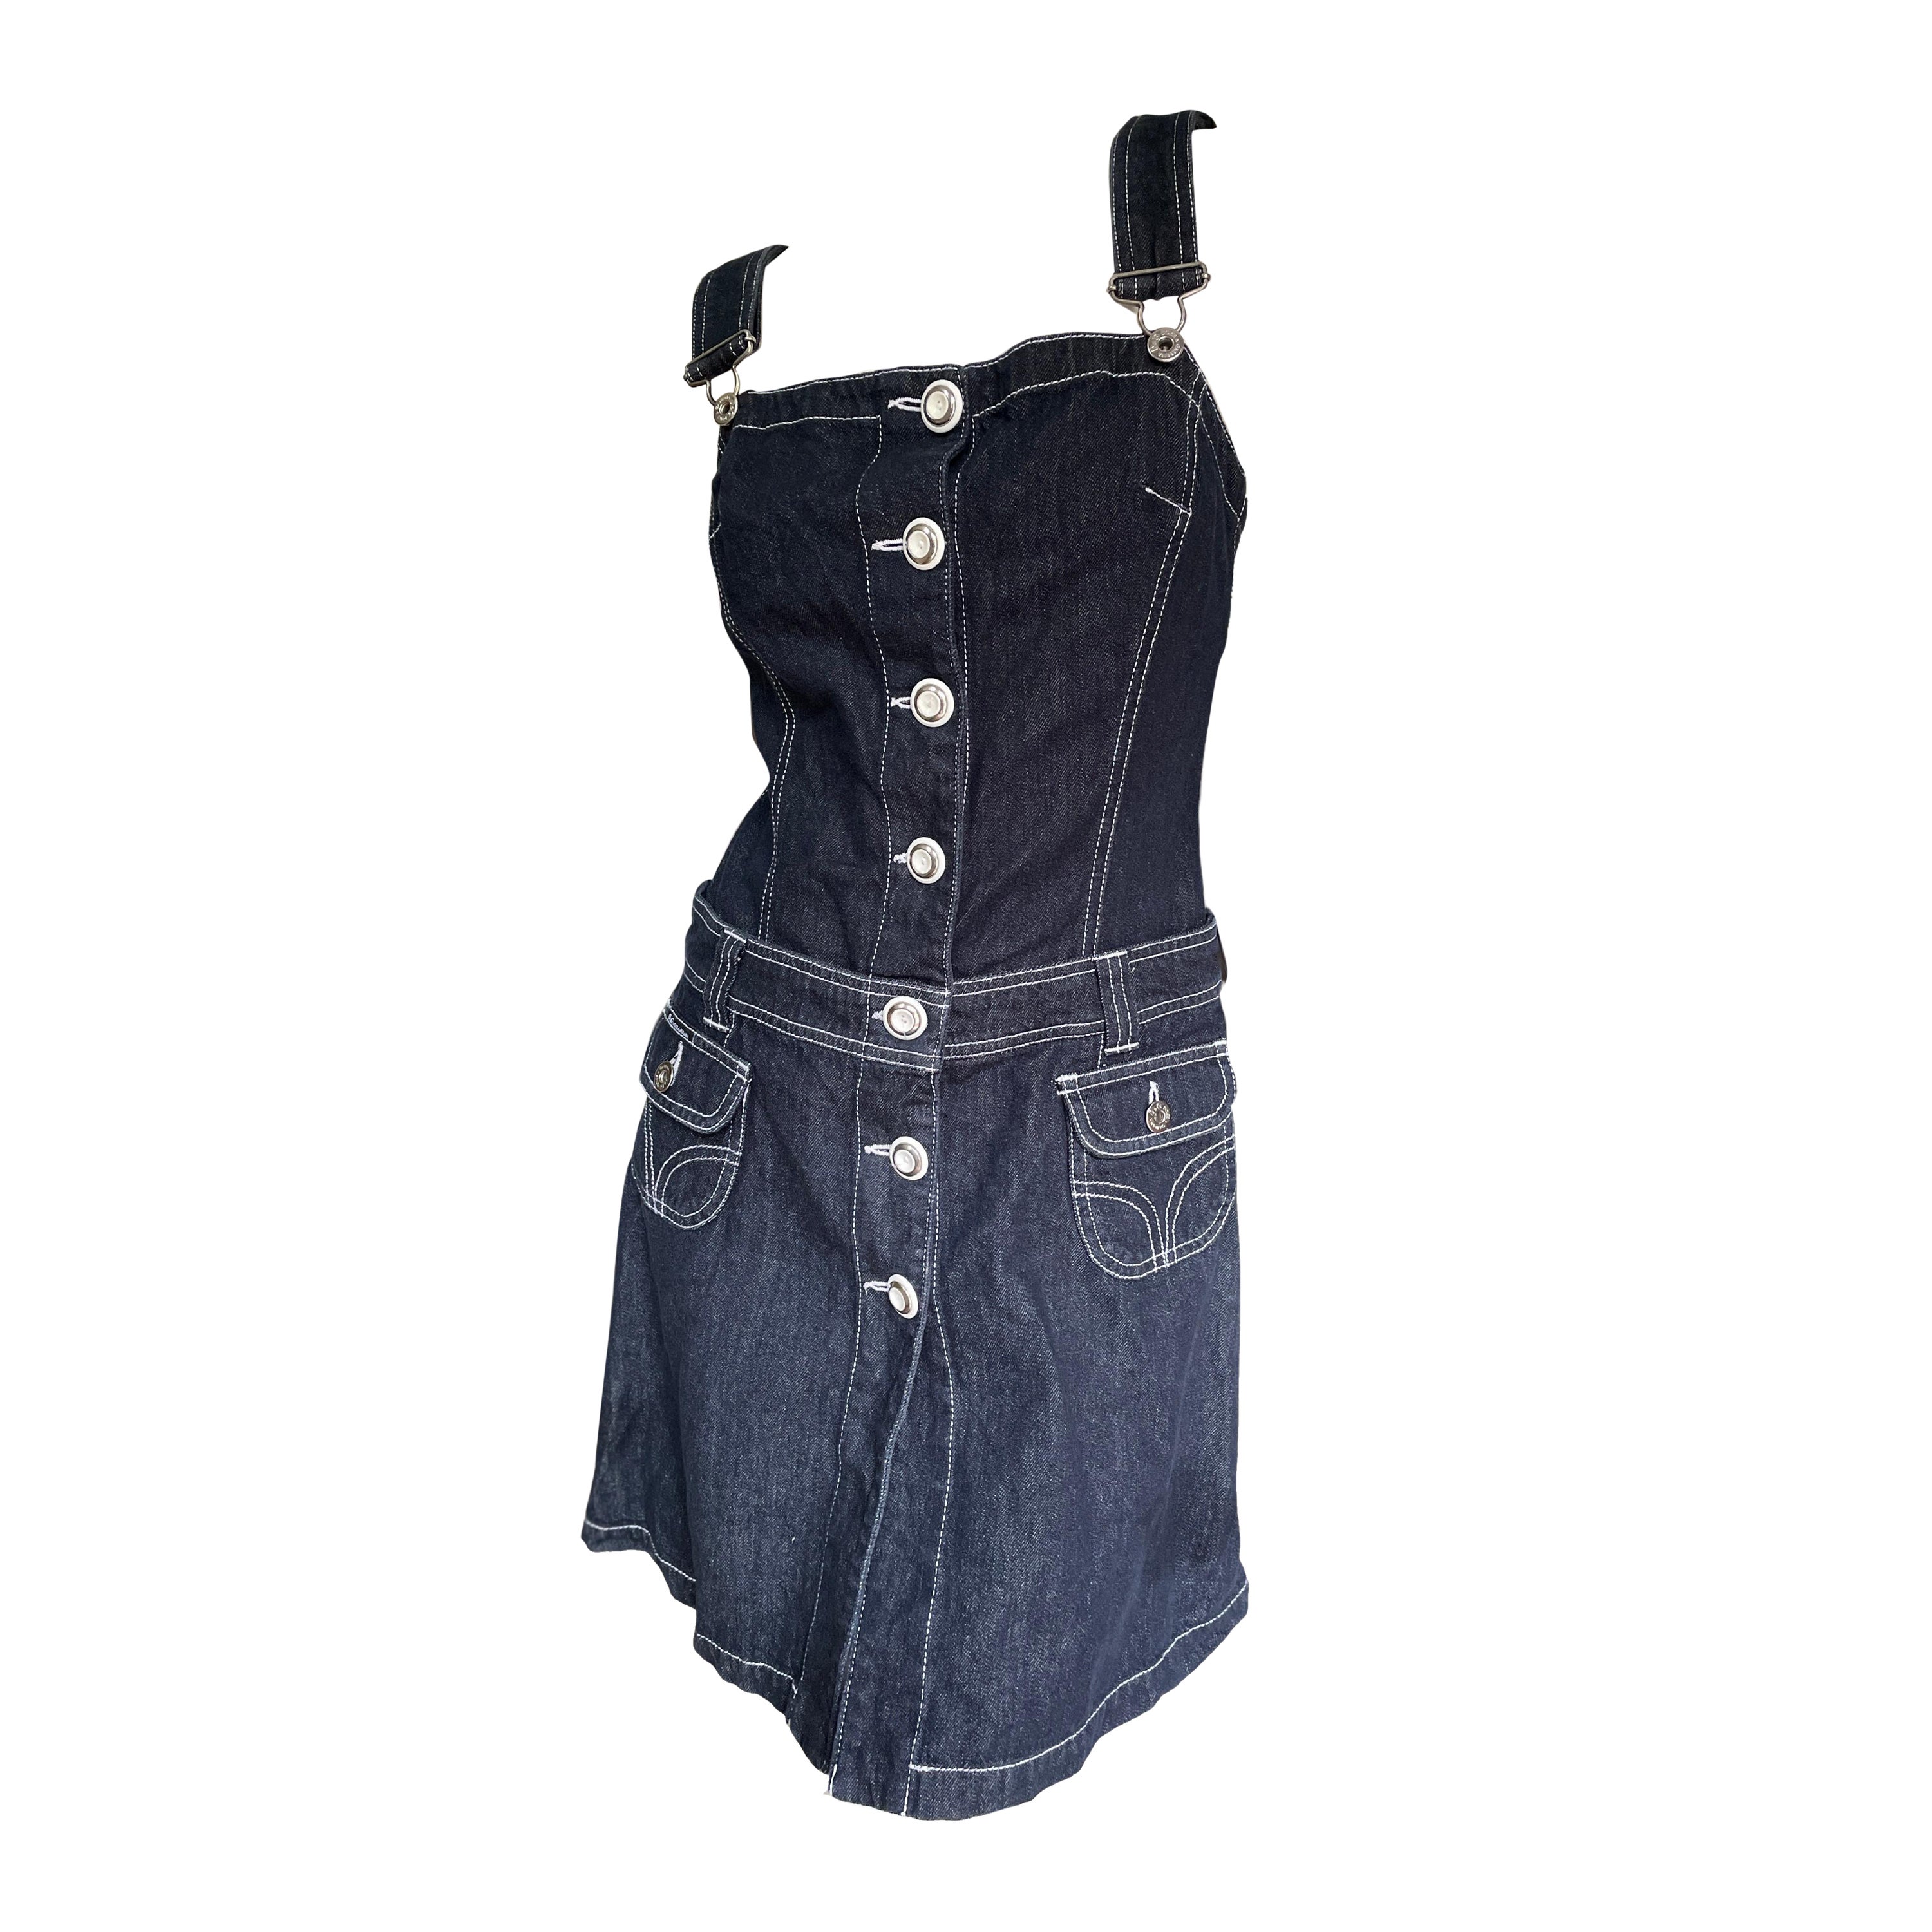 D&G by Dolce & Gabbana Vintage Overall Style Denim Blue Jean Dress For Sale